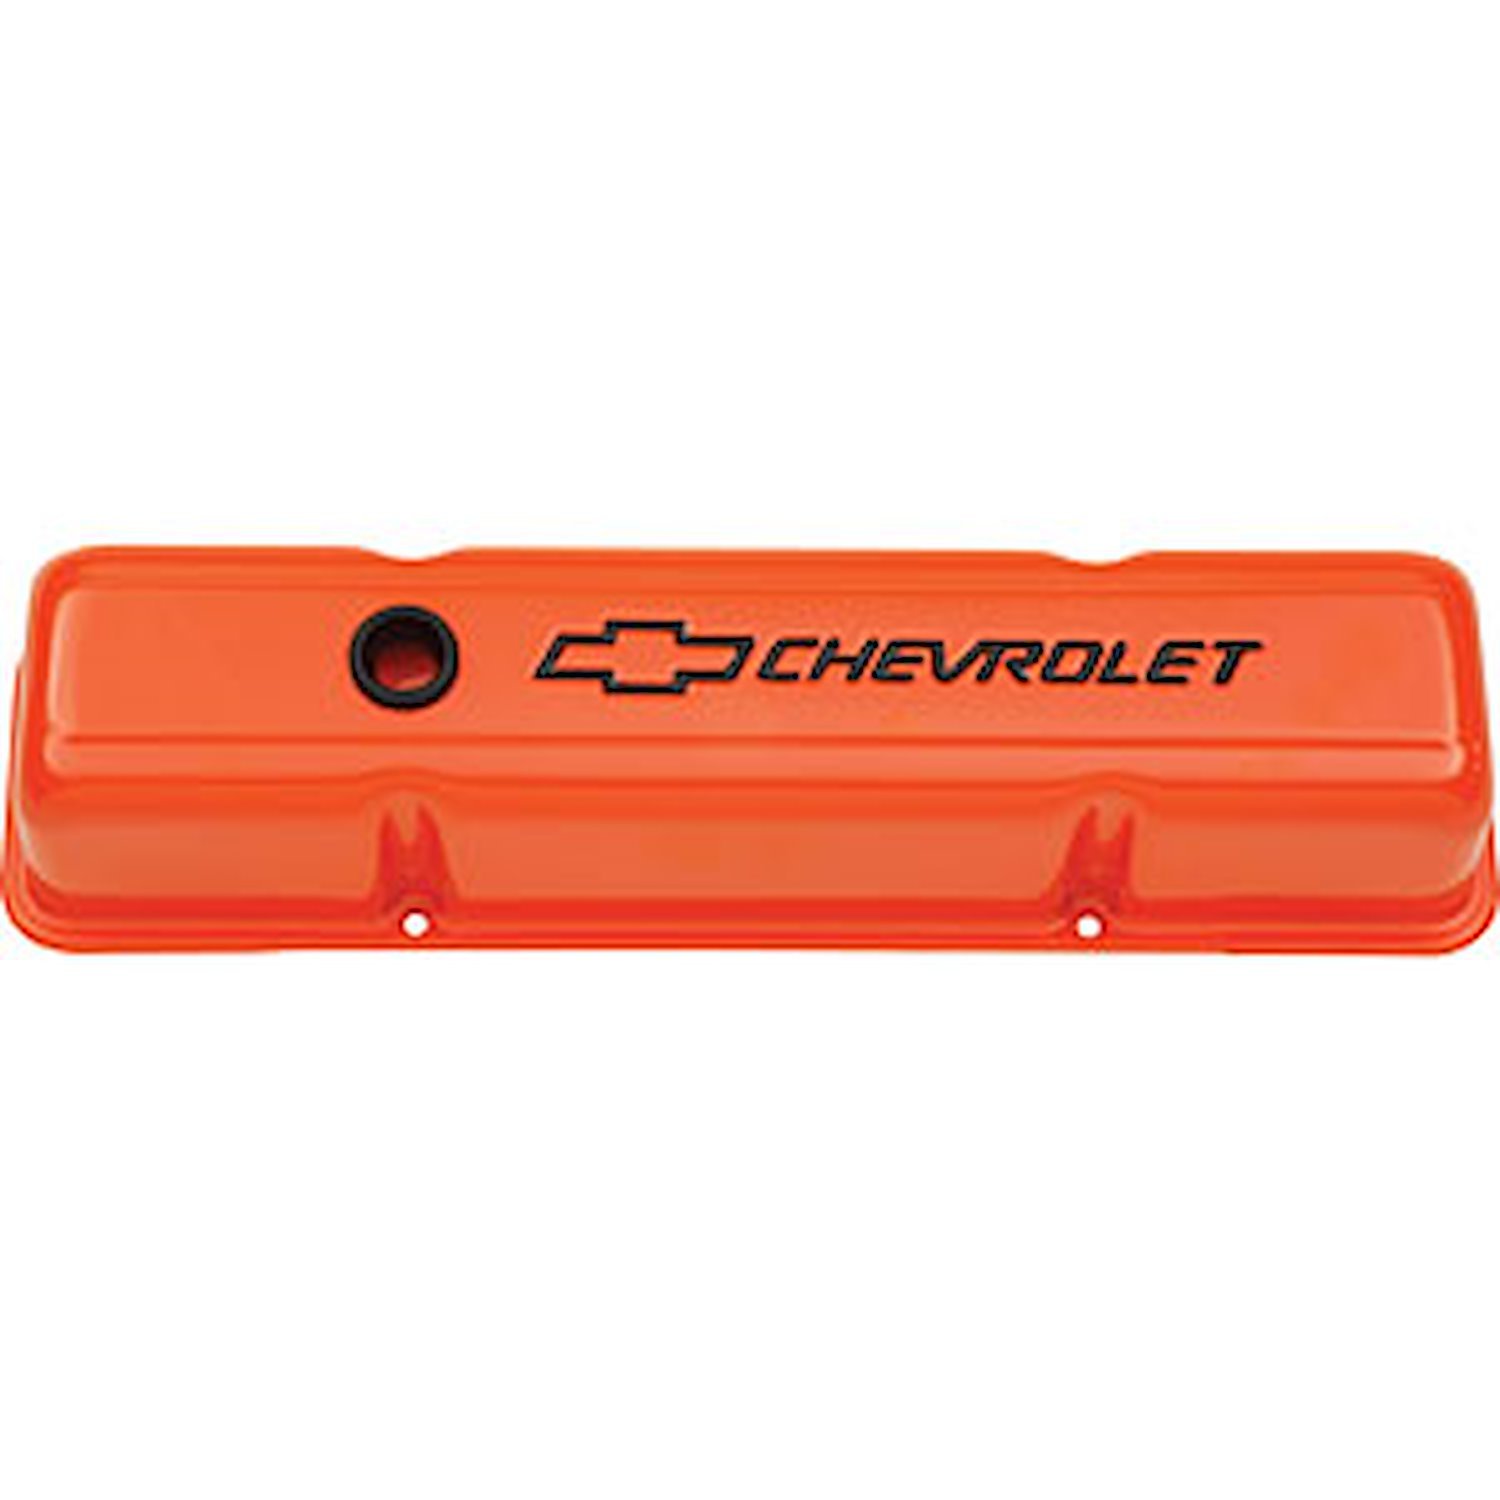 Tall Valve Covers for 1958-1986 Small Block in Chevy Chevy Orange Finish